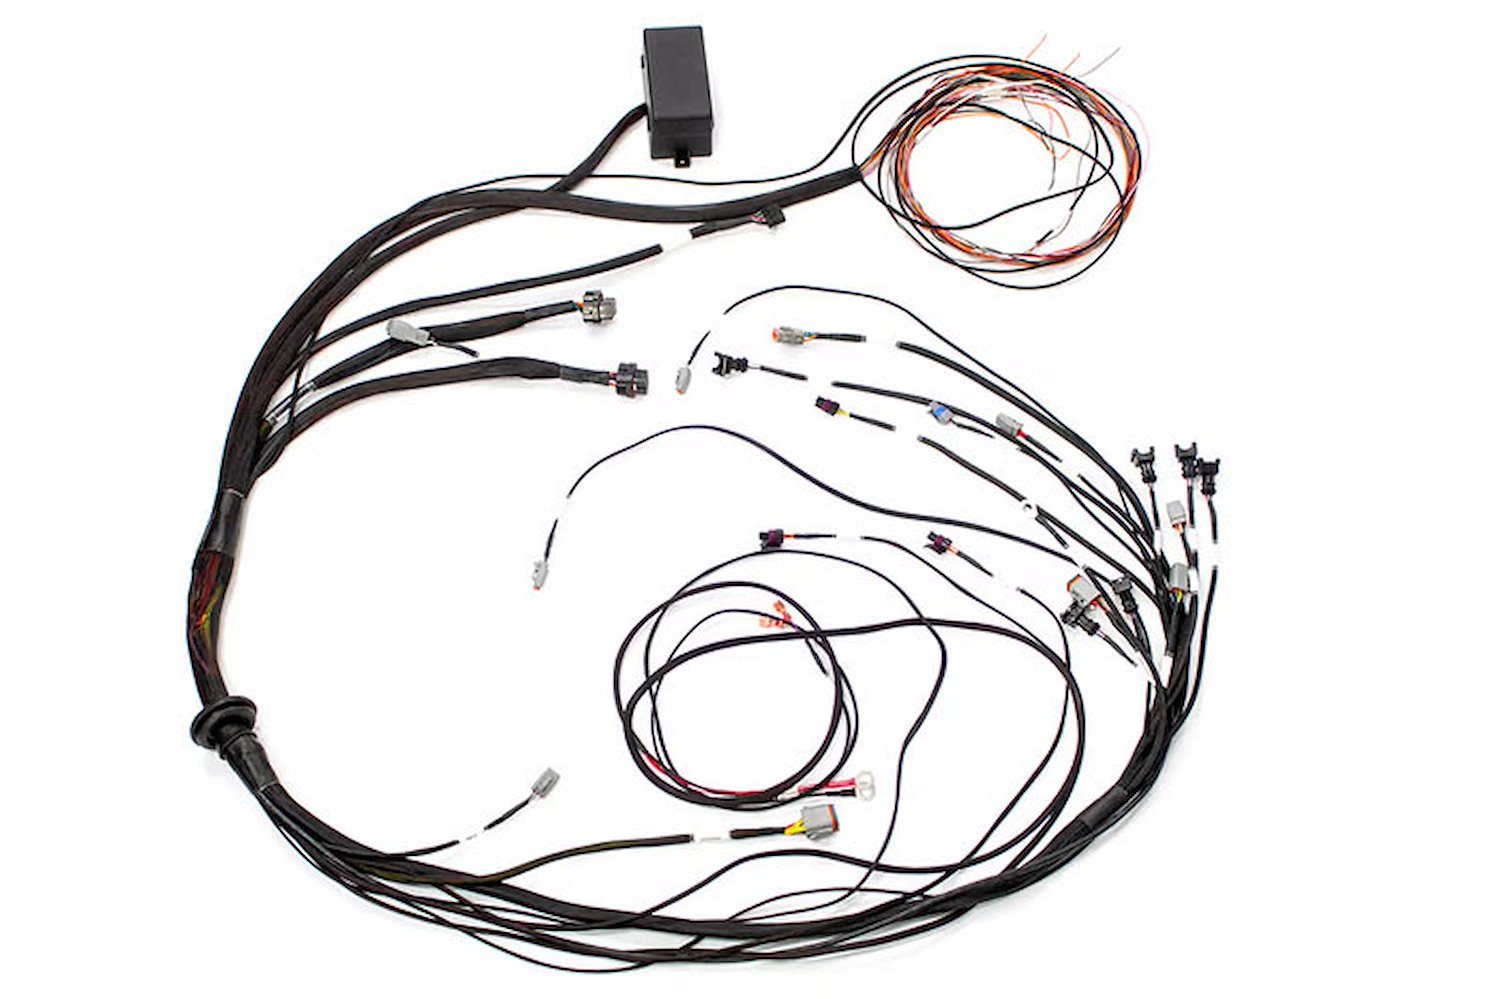 HT-140879 Elite 1000/1500 S6-8 Terminated Harness Only, Fly Lead Ignition, Mazda 13B